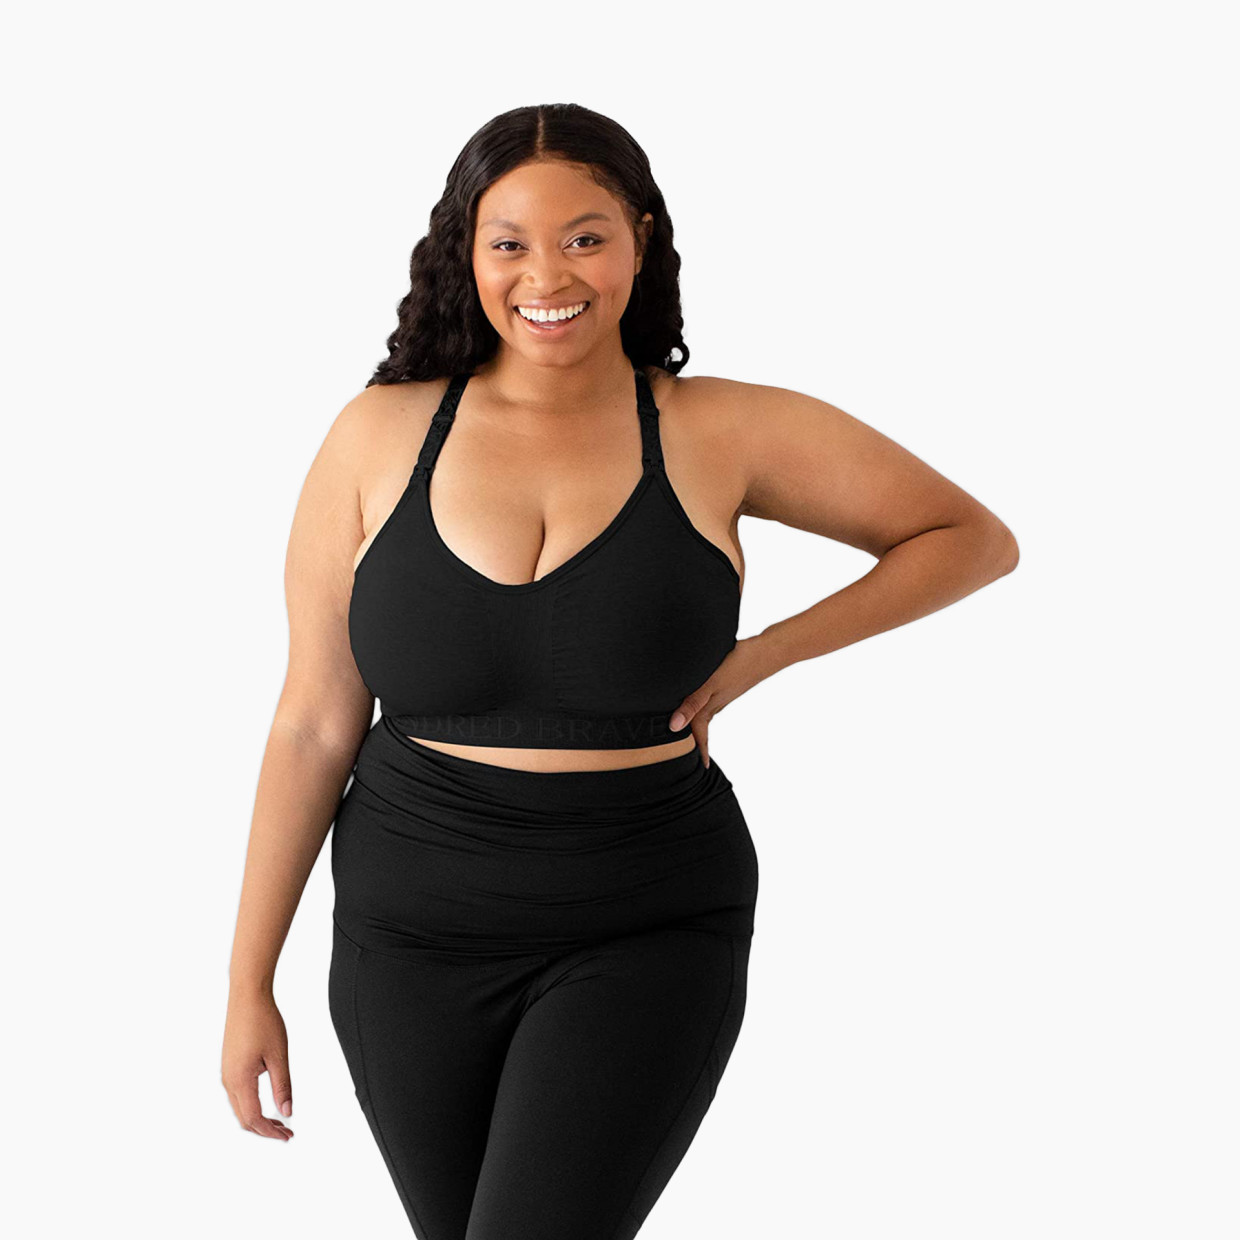 Kindred Bravely Sublime Support Low Impact Nursing & Maternity Sports Bra - Black, Xxx-Large-Busty.